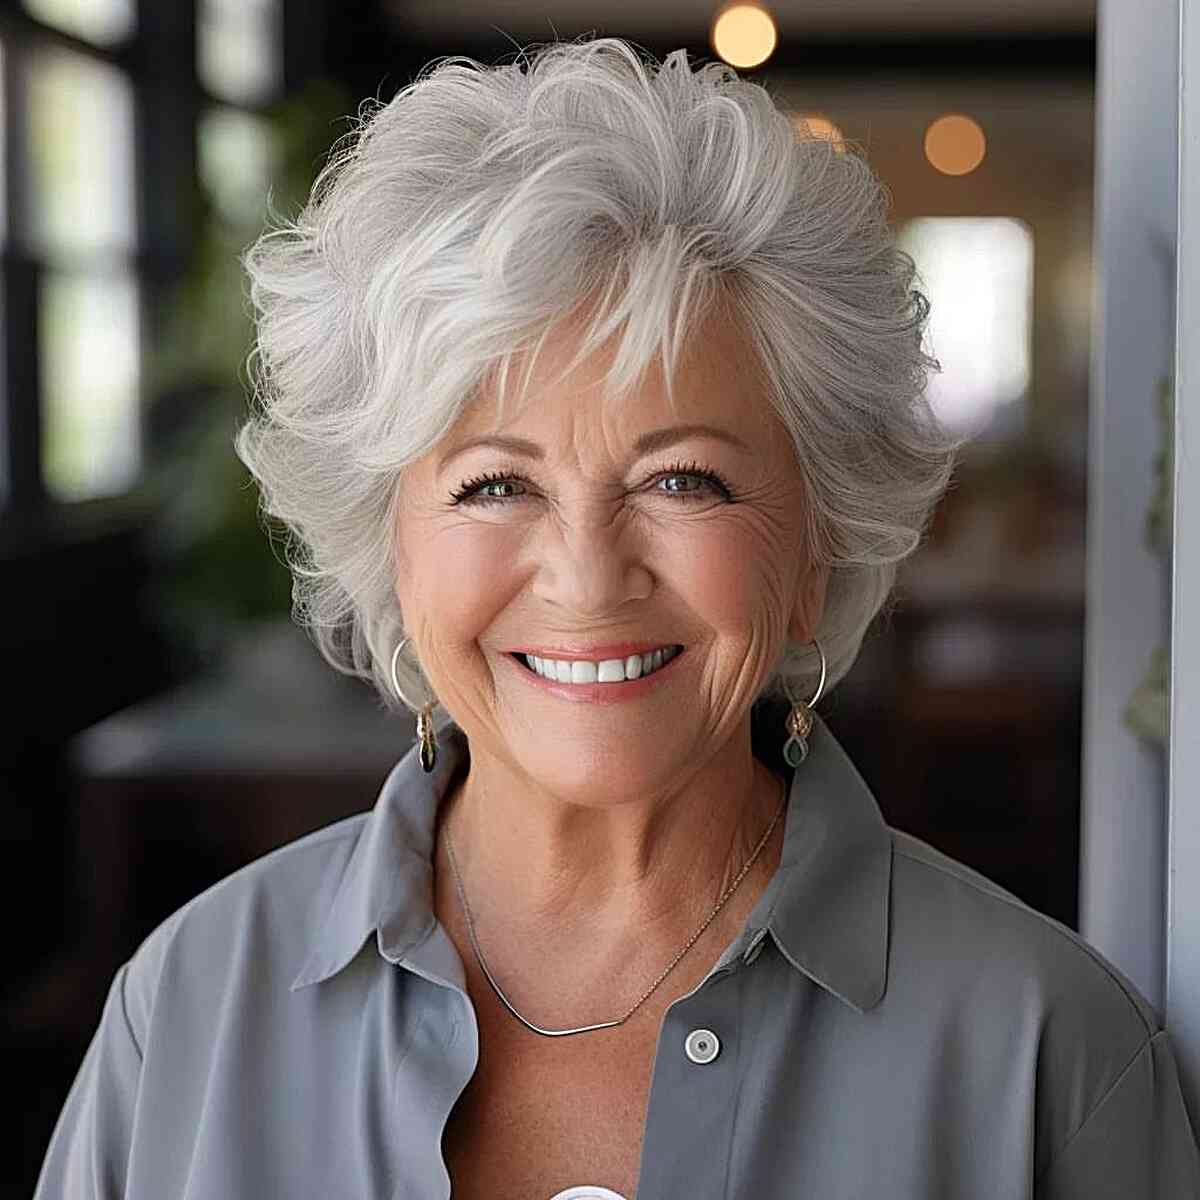 Short Silver Feathery Haircut with Side Fringe for Seniors Over 60 with Rounded Faces